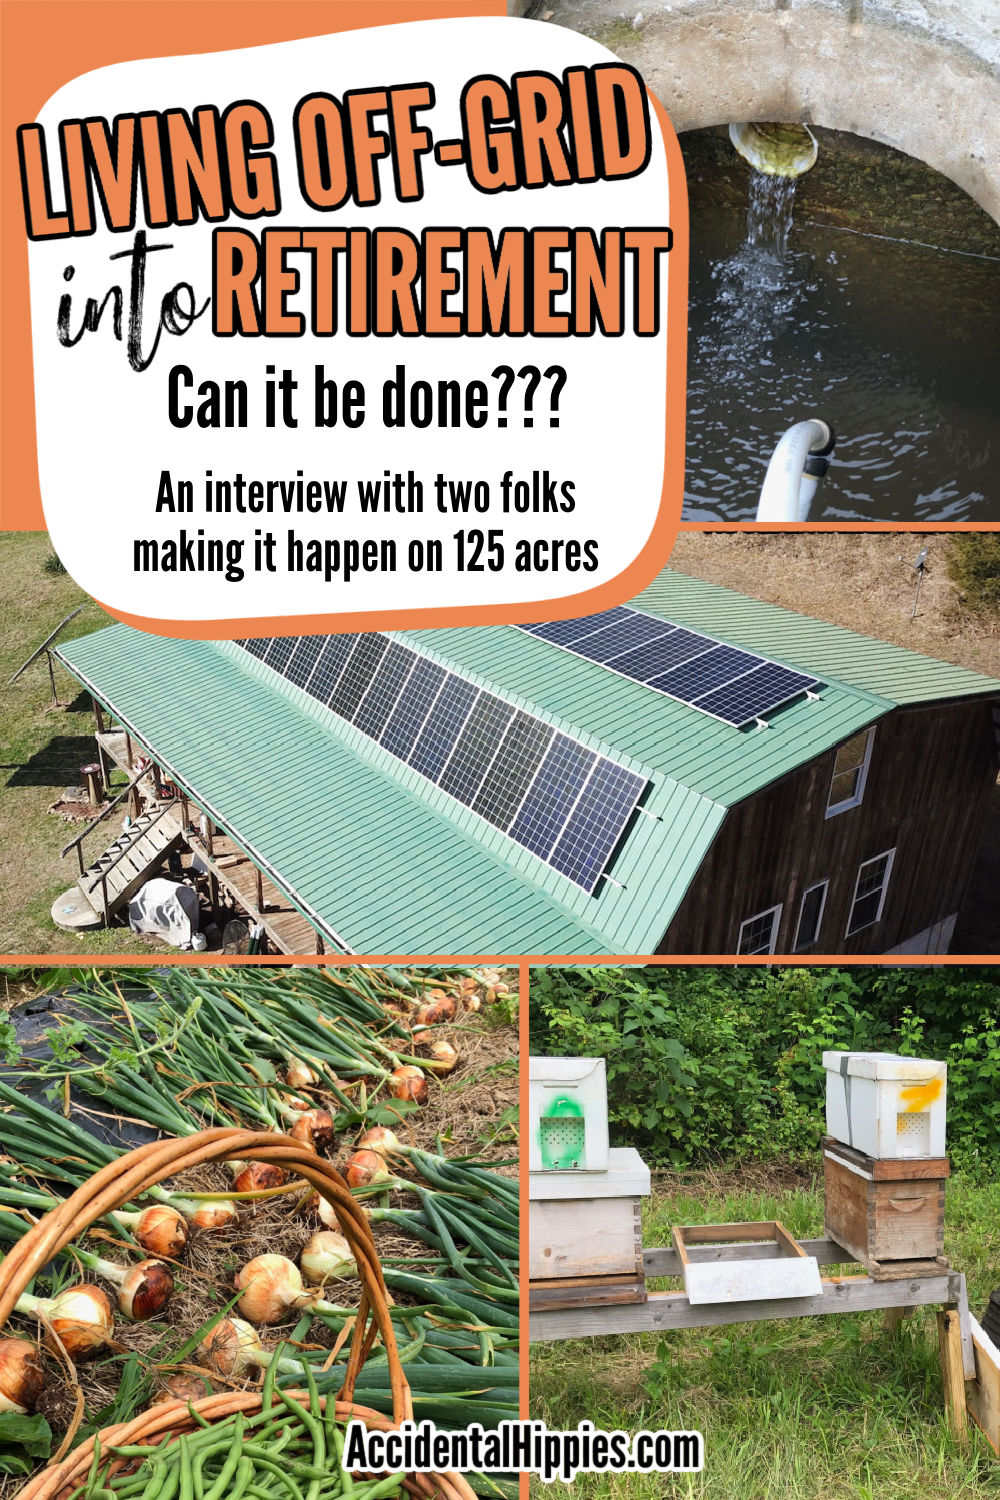 Text: Living Off-Grid Into Retirement - Can it be done??? An interview with two folks making it happen on 125 acres Image: collage showing water entering a cister, solar panels on a green metal roof, vegetables in a garden, and beehives